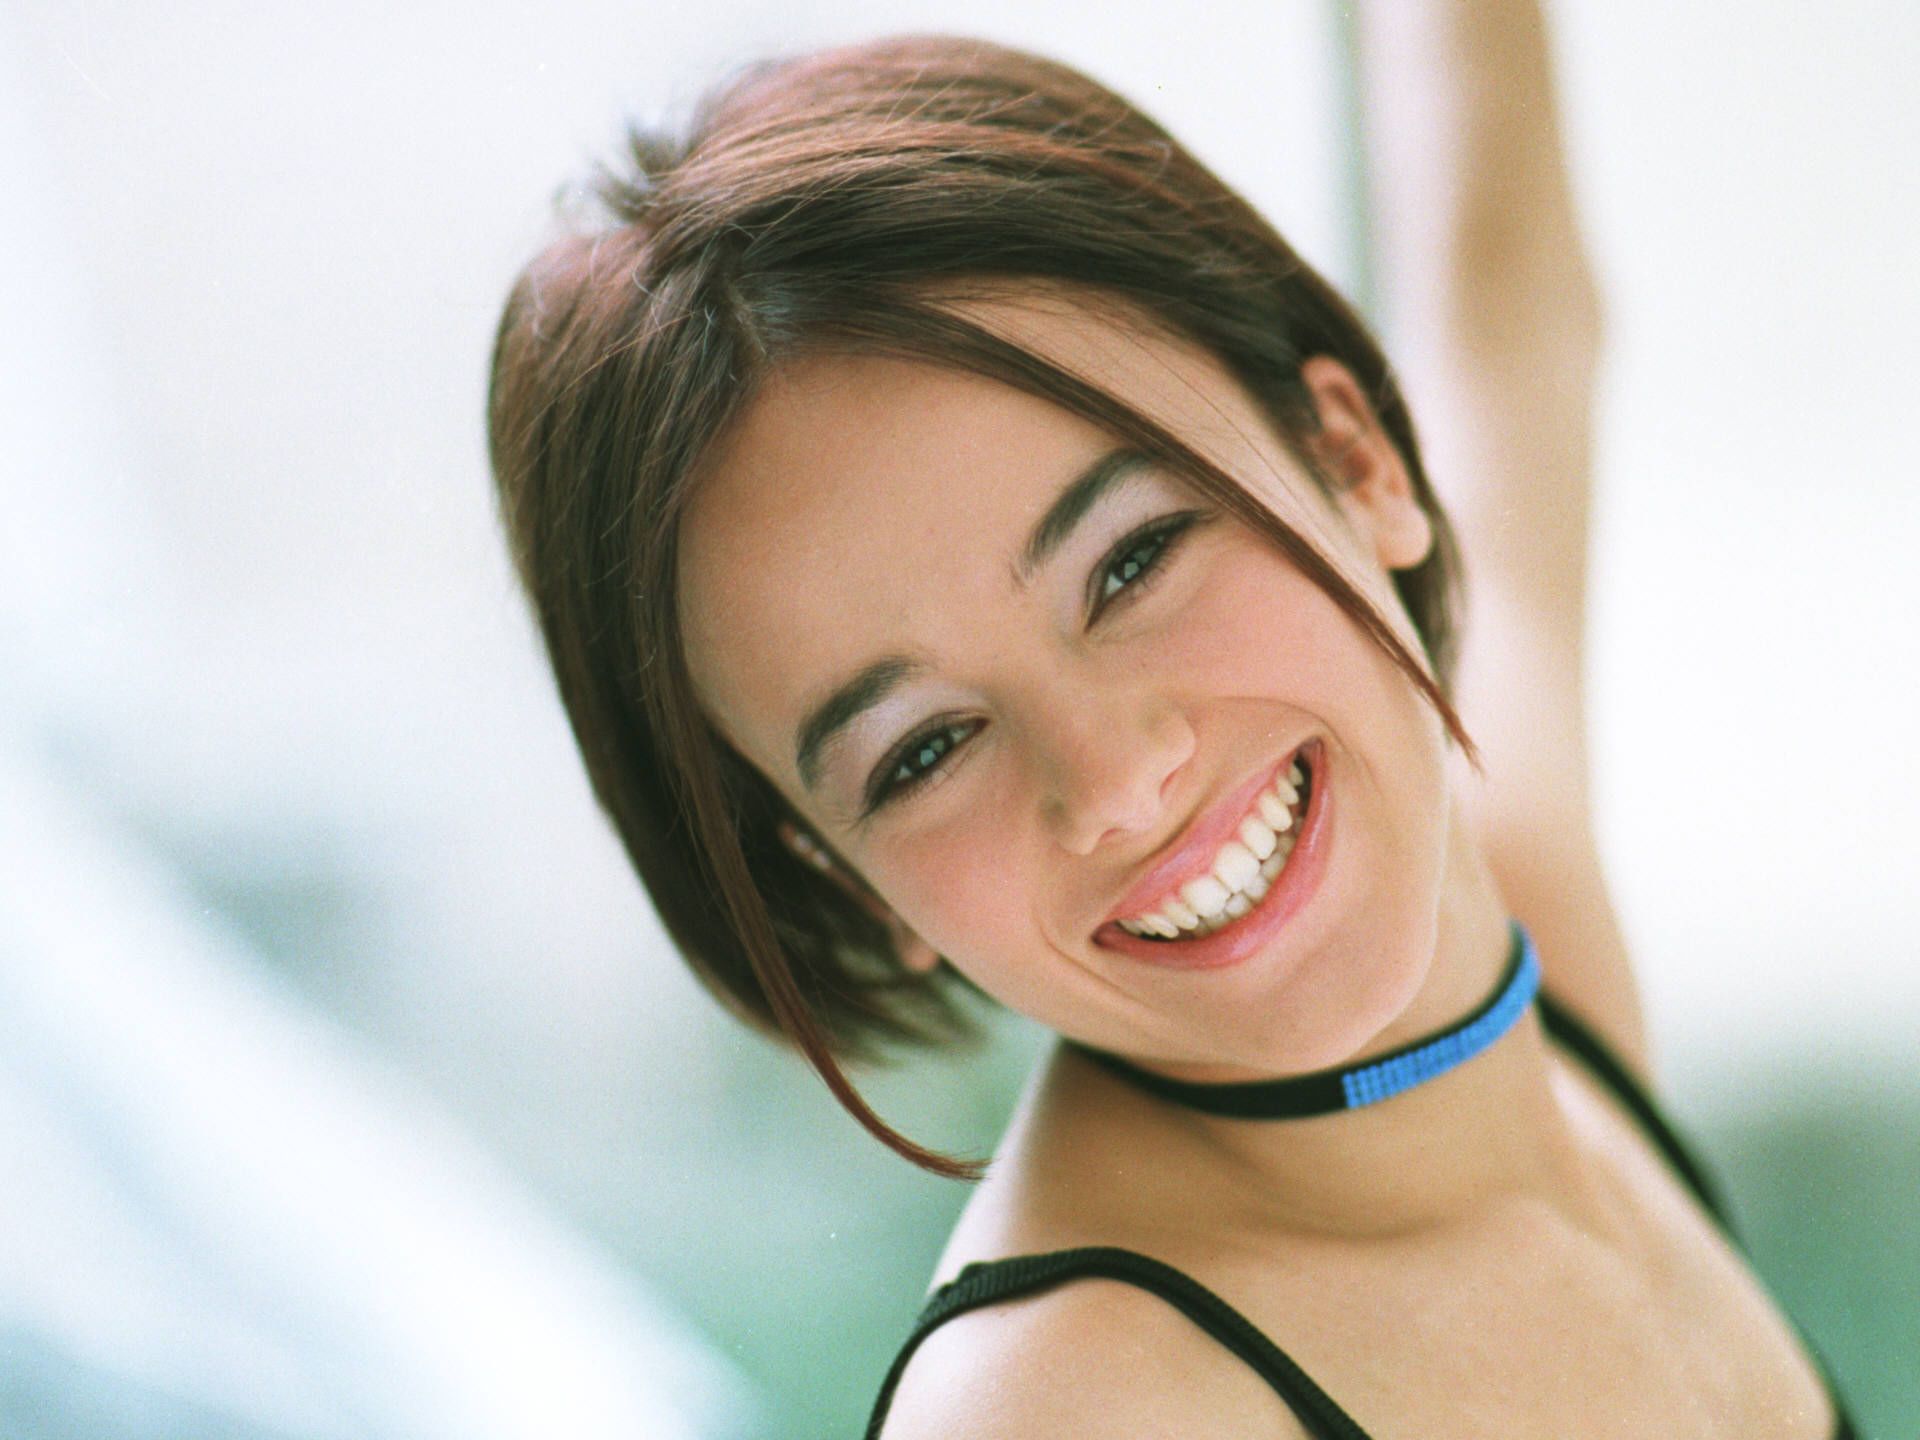 Alizee French singer beautiful girl Wallpapers - HD Wallpapers 86735